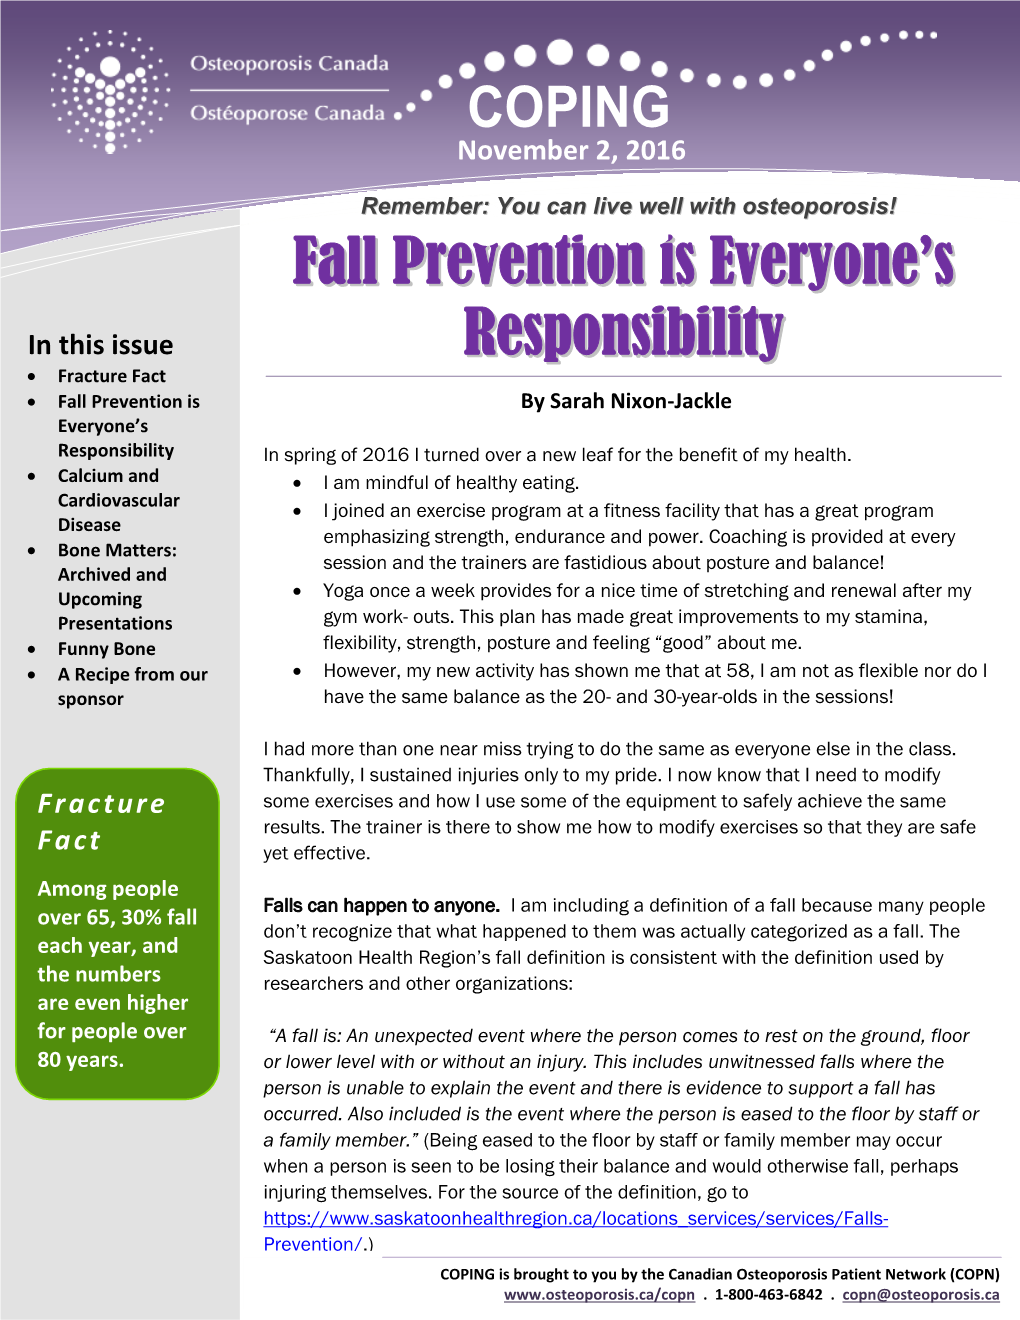 Fall Prevention Is Everyone's Responsibility